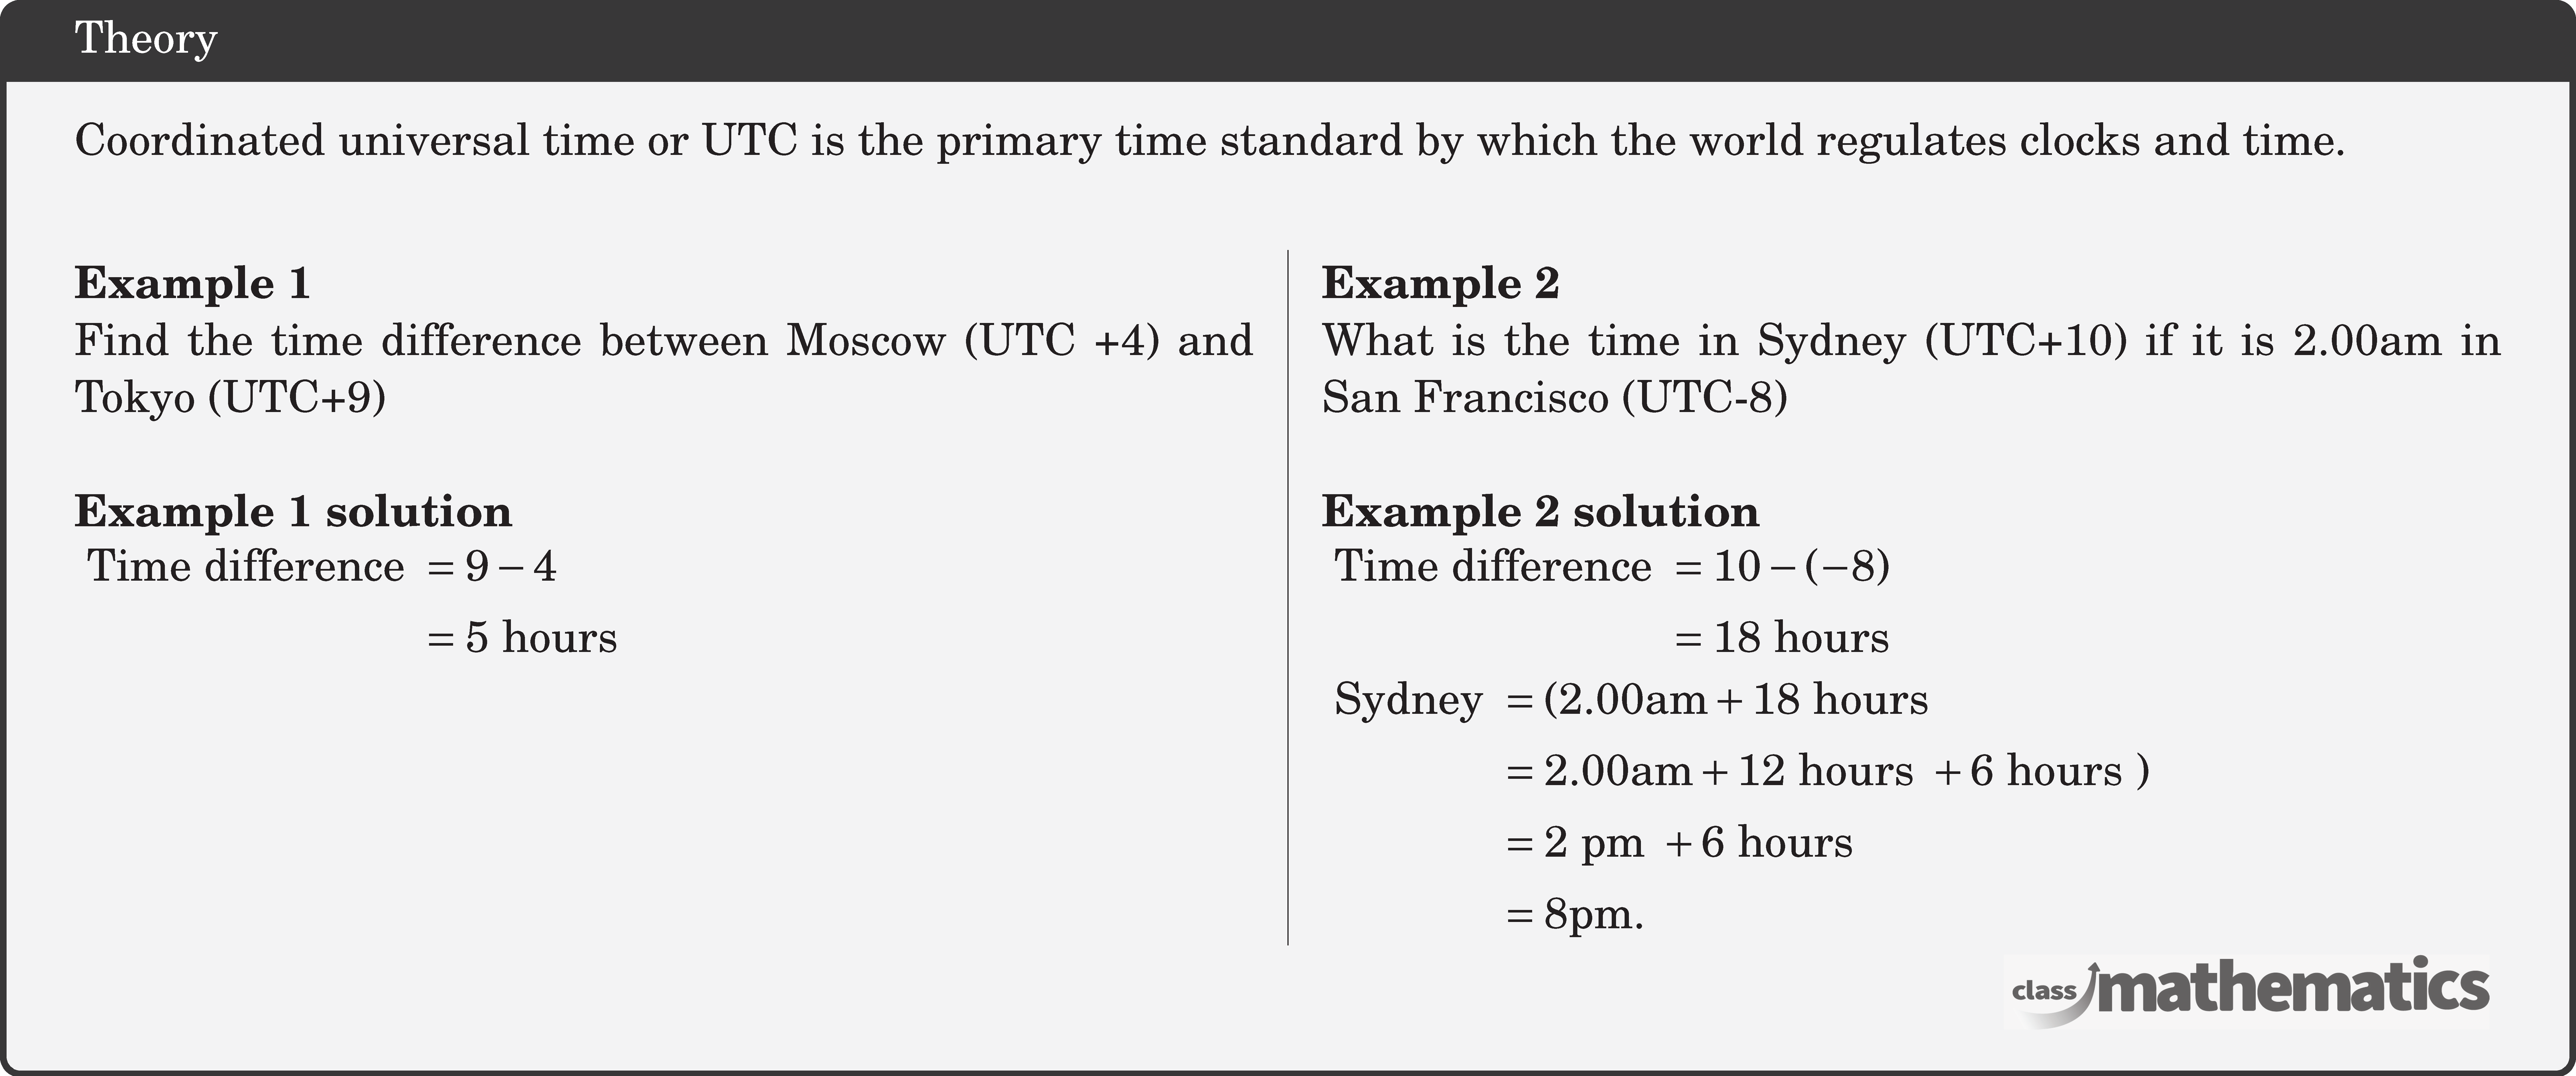 \begin{multicols}{2}  \textbf{Example 1}\\ Find the time difference between Moscow (UTC +4) and Tokyo (UTC+9)\\  \textbf{Example 1 solution}\\ \(\begin{aligned} \text { Time difference } & =9-4 \\ & =5 \text { hours } \end{aligned}\)  \columnbreak \textbf{Example 2}\\ What is the time in Sydney (UTC+10) if it is \(2.00 \text{am}\) in San Francisco (UTC-8)\\  \textbf{Example 2 solution}\\ \(\begin{aligned} \text { Time difference } & =10-(-8) \\ & =18 \text { hours }  \end{aligned}\)\\ \(\begin{aligned} \text { Sydney } & =(2.00 \text{am}+18 \text { hours } \\ & =2.00 \text{am}+12 \text { hours }+6 \text { hours }) \\ & =2 \text { pm }+6 \text { hours } \\ & =8 \text{pm} . \end{aligned}\) \end{multicols}